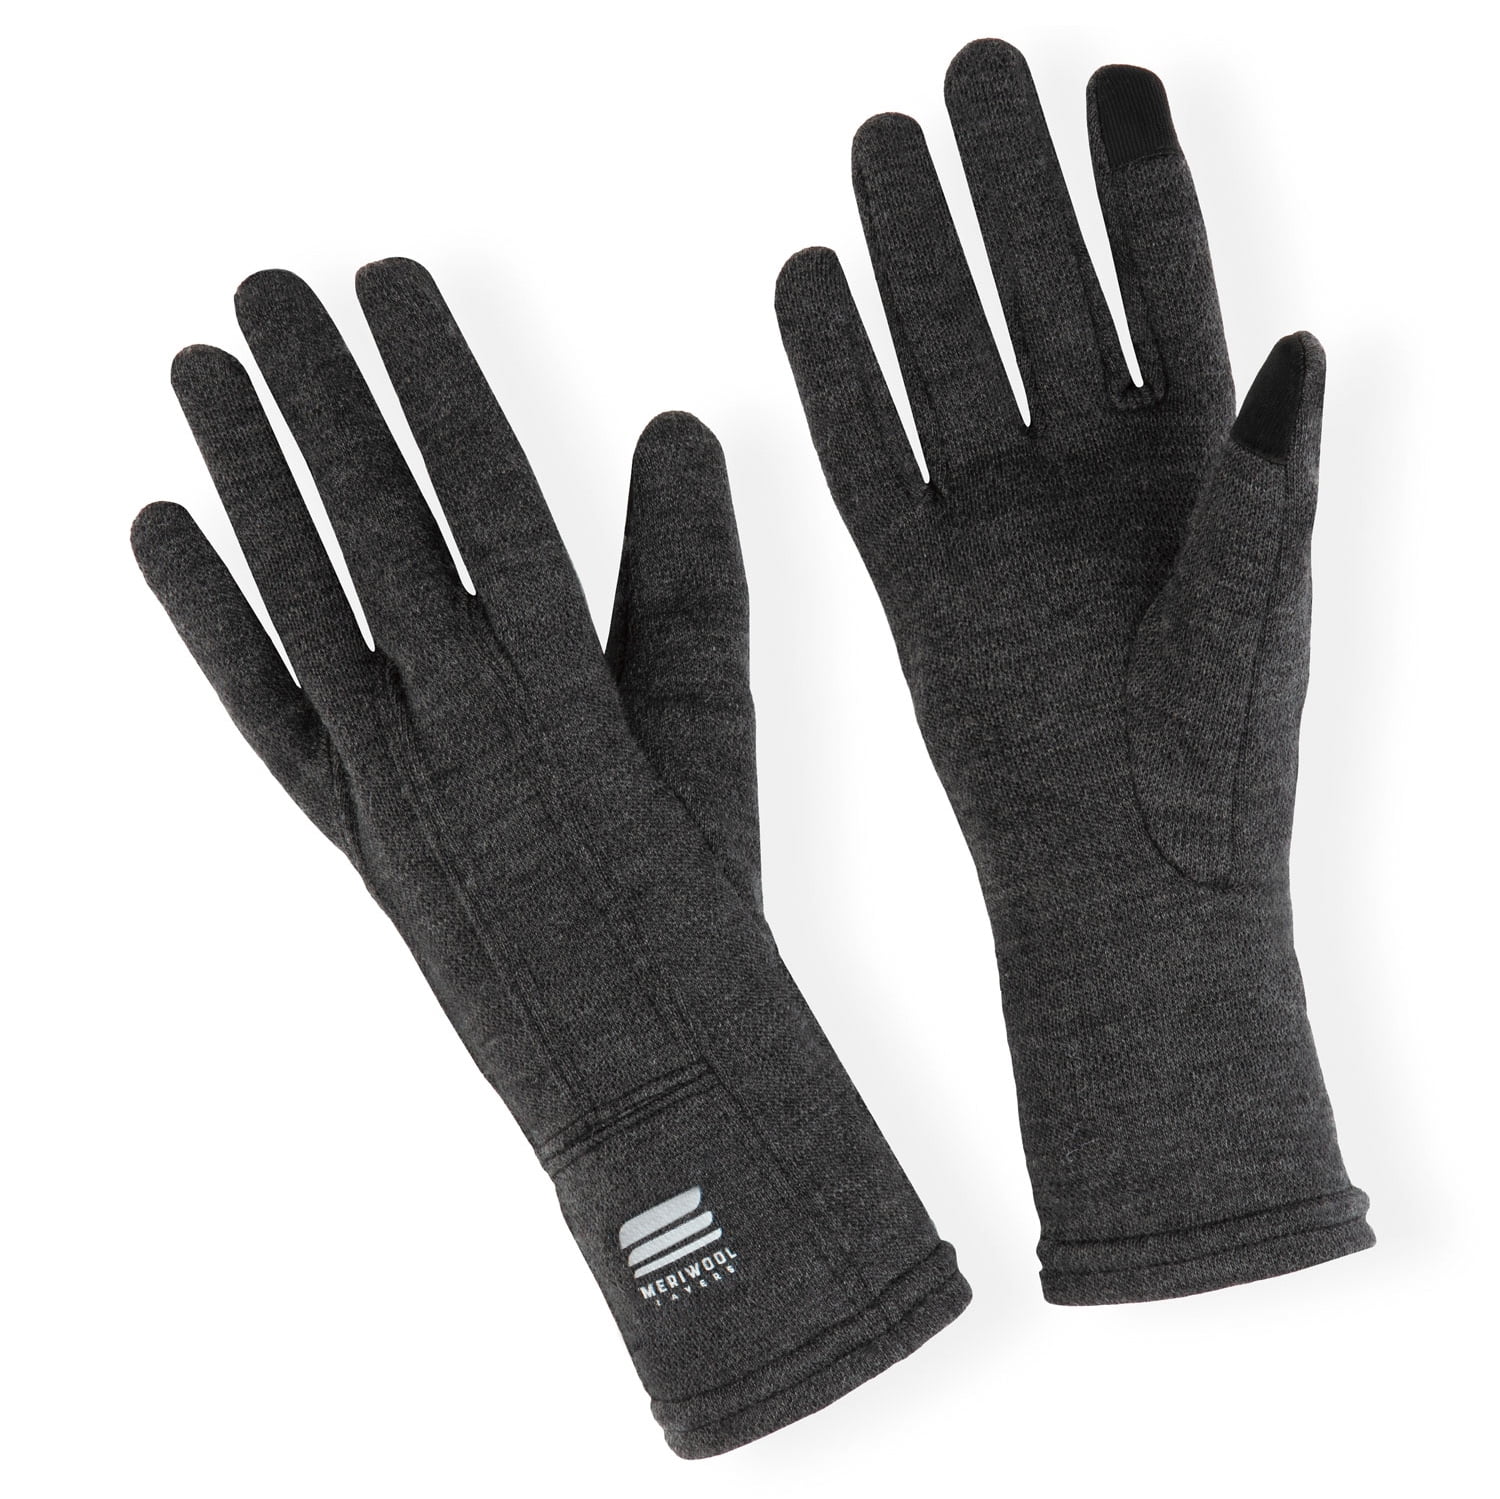 MERIWOOL Merino Wool Unisex Glove Liners for use with Touch